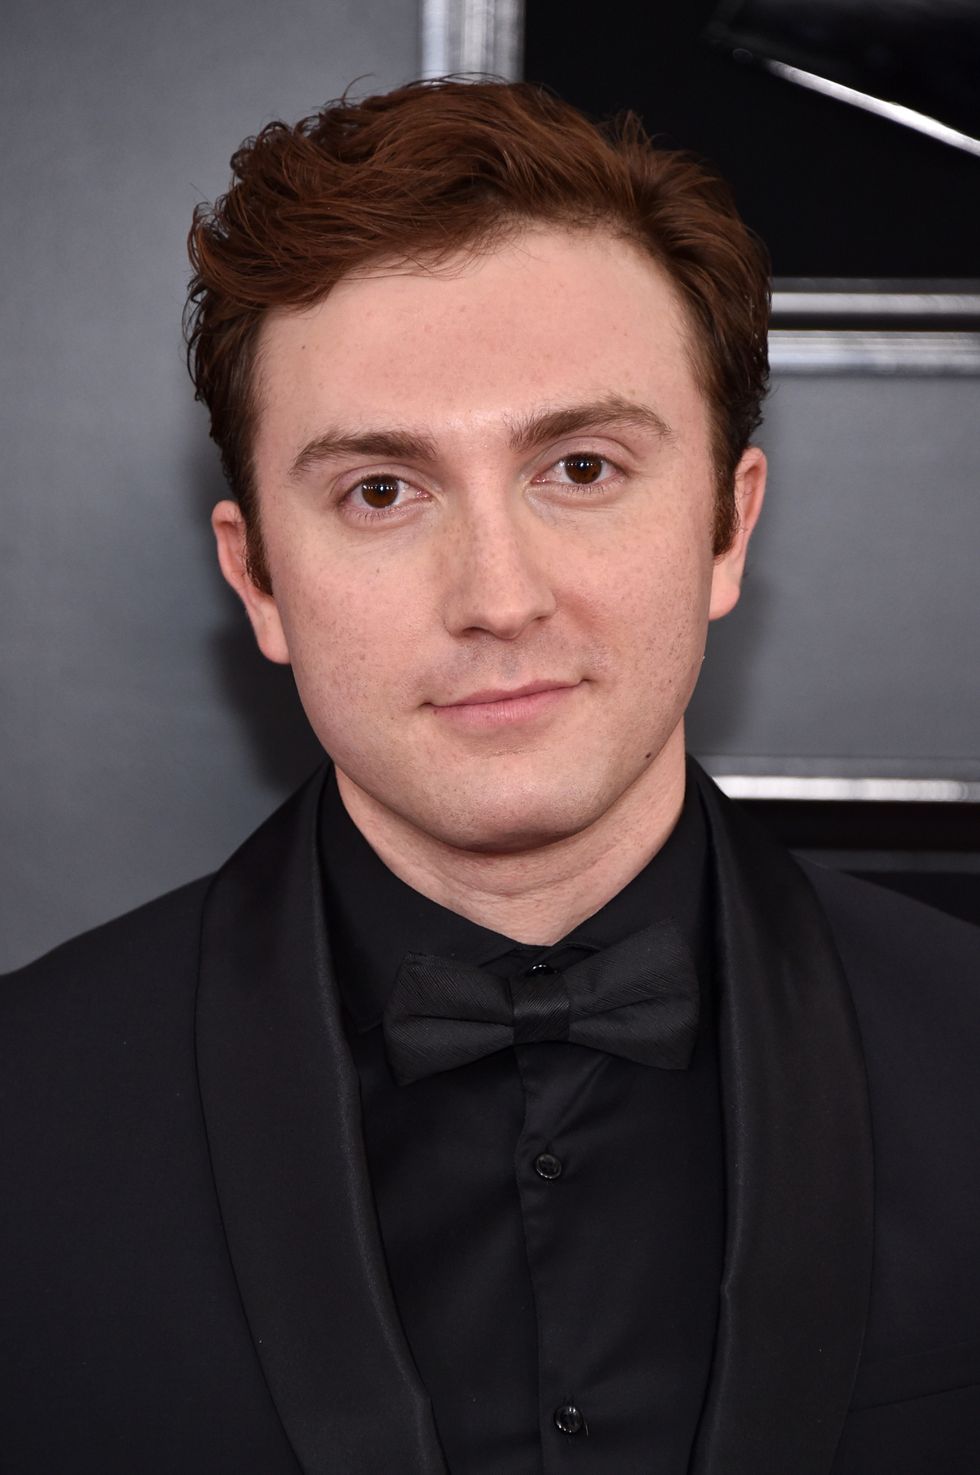 los angeles, ca   february 10  daryl sabara attends the 61st annual grammy awards at staples center on february 10, 2019 in los angeles, california  photo by john shearergetty images for the recording academy